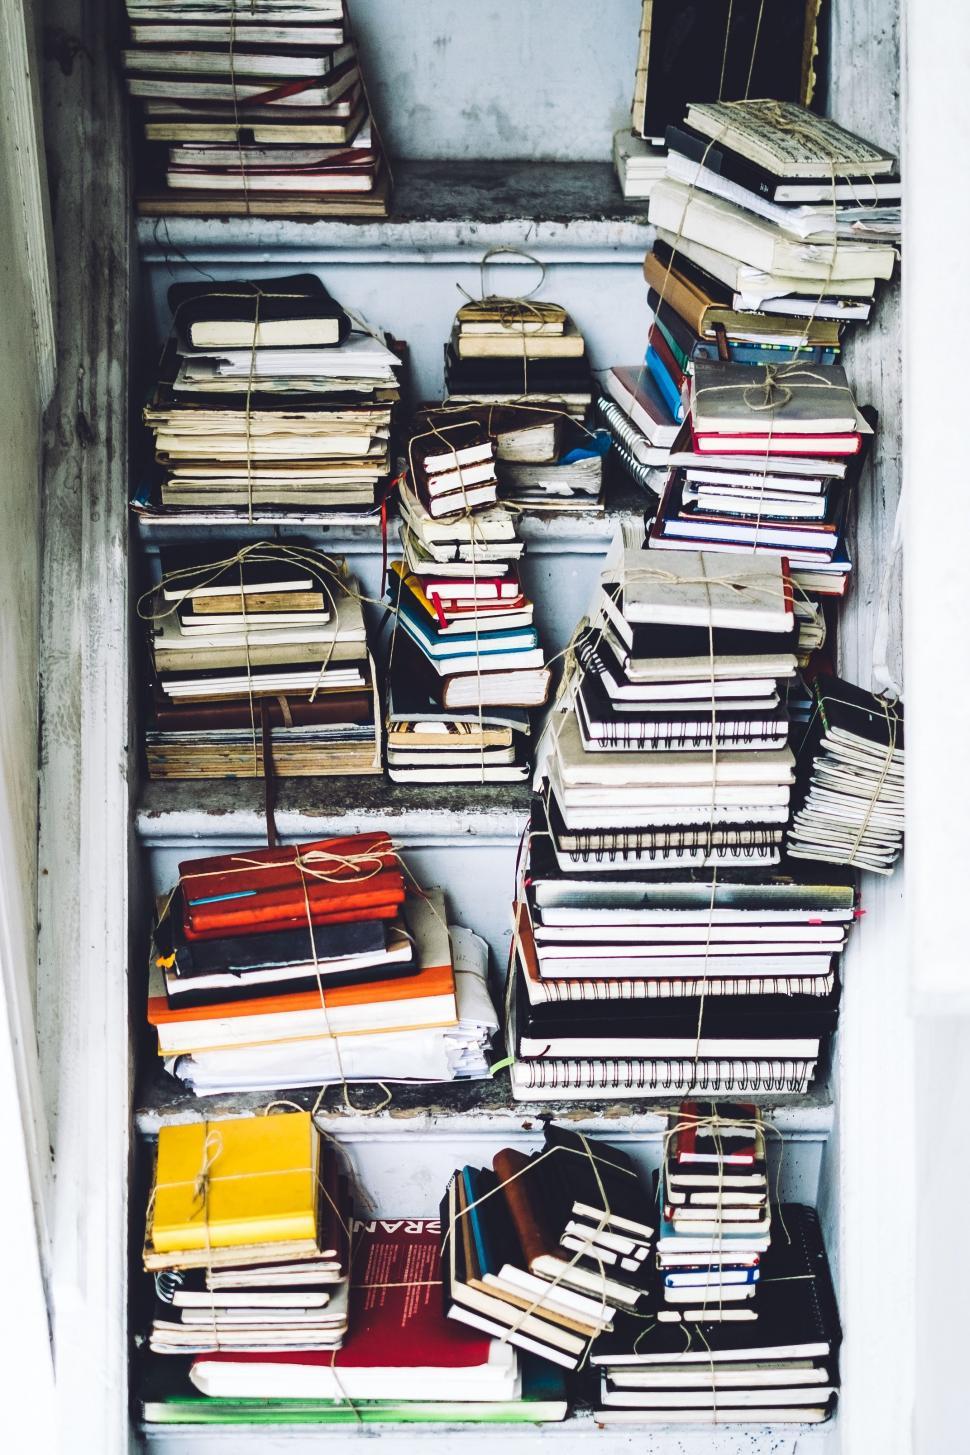 Free Image of Organized Book Shelf Filled With Books 